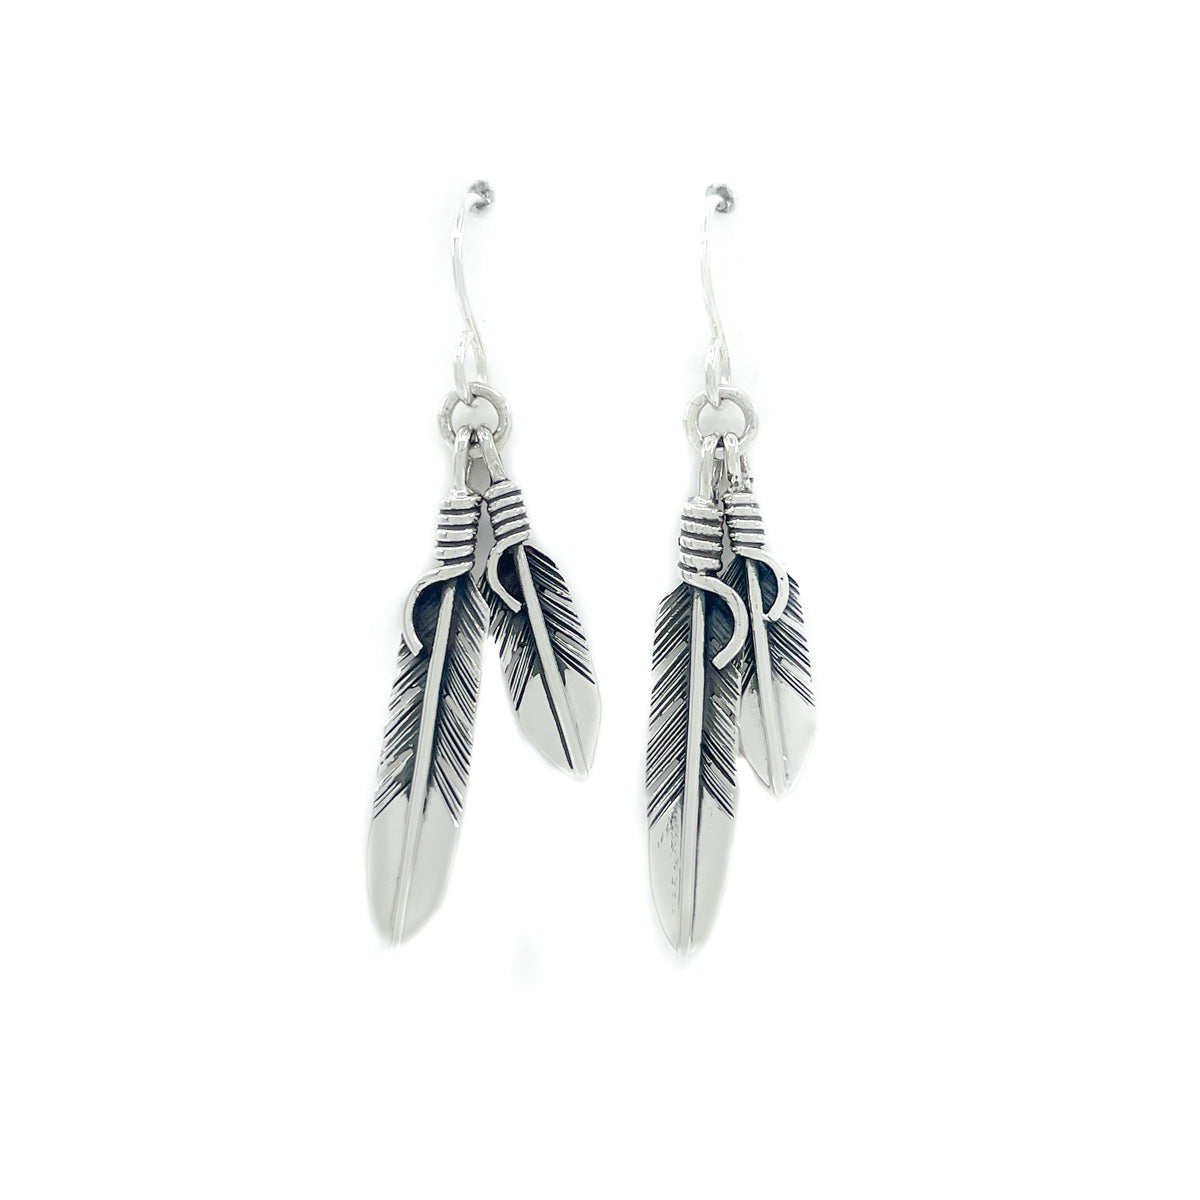 Sterling silver double feather earrings with sterling silver wires Small feather measures approx. .75 inches, large feather measures approx. 1.25 inches, dangles from ear lobe approx. 2 inches  When worn, the movement of the two dangling feathers gives nice, sparkly effect